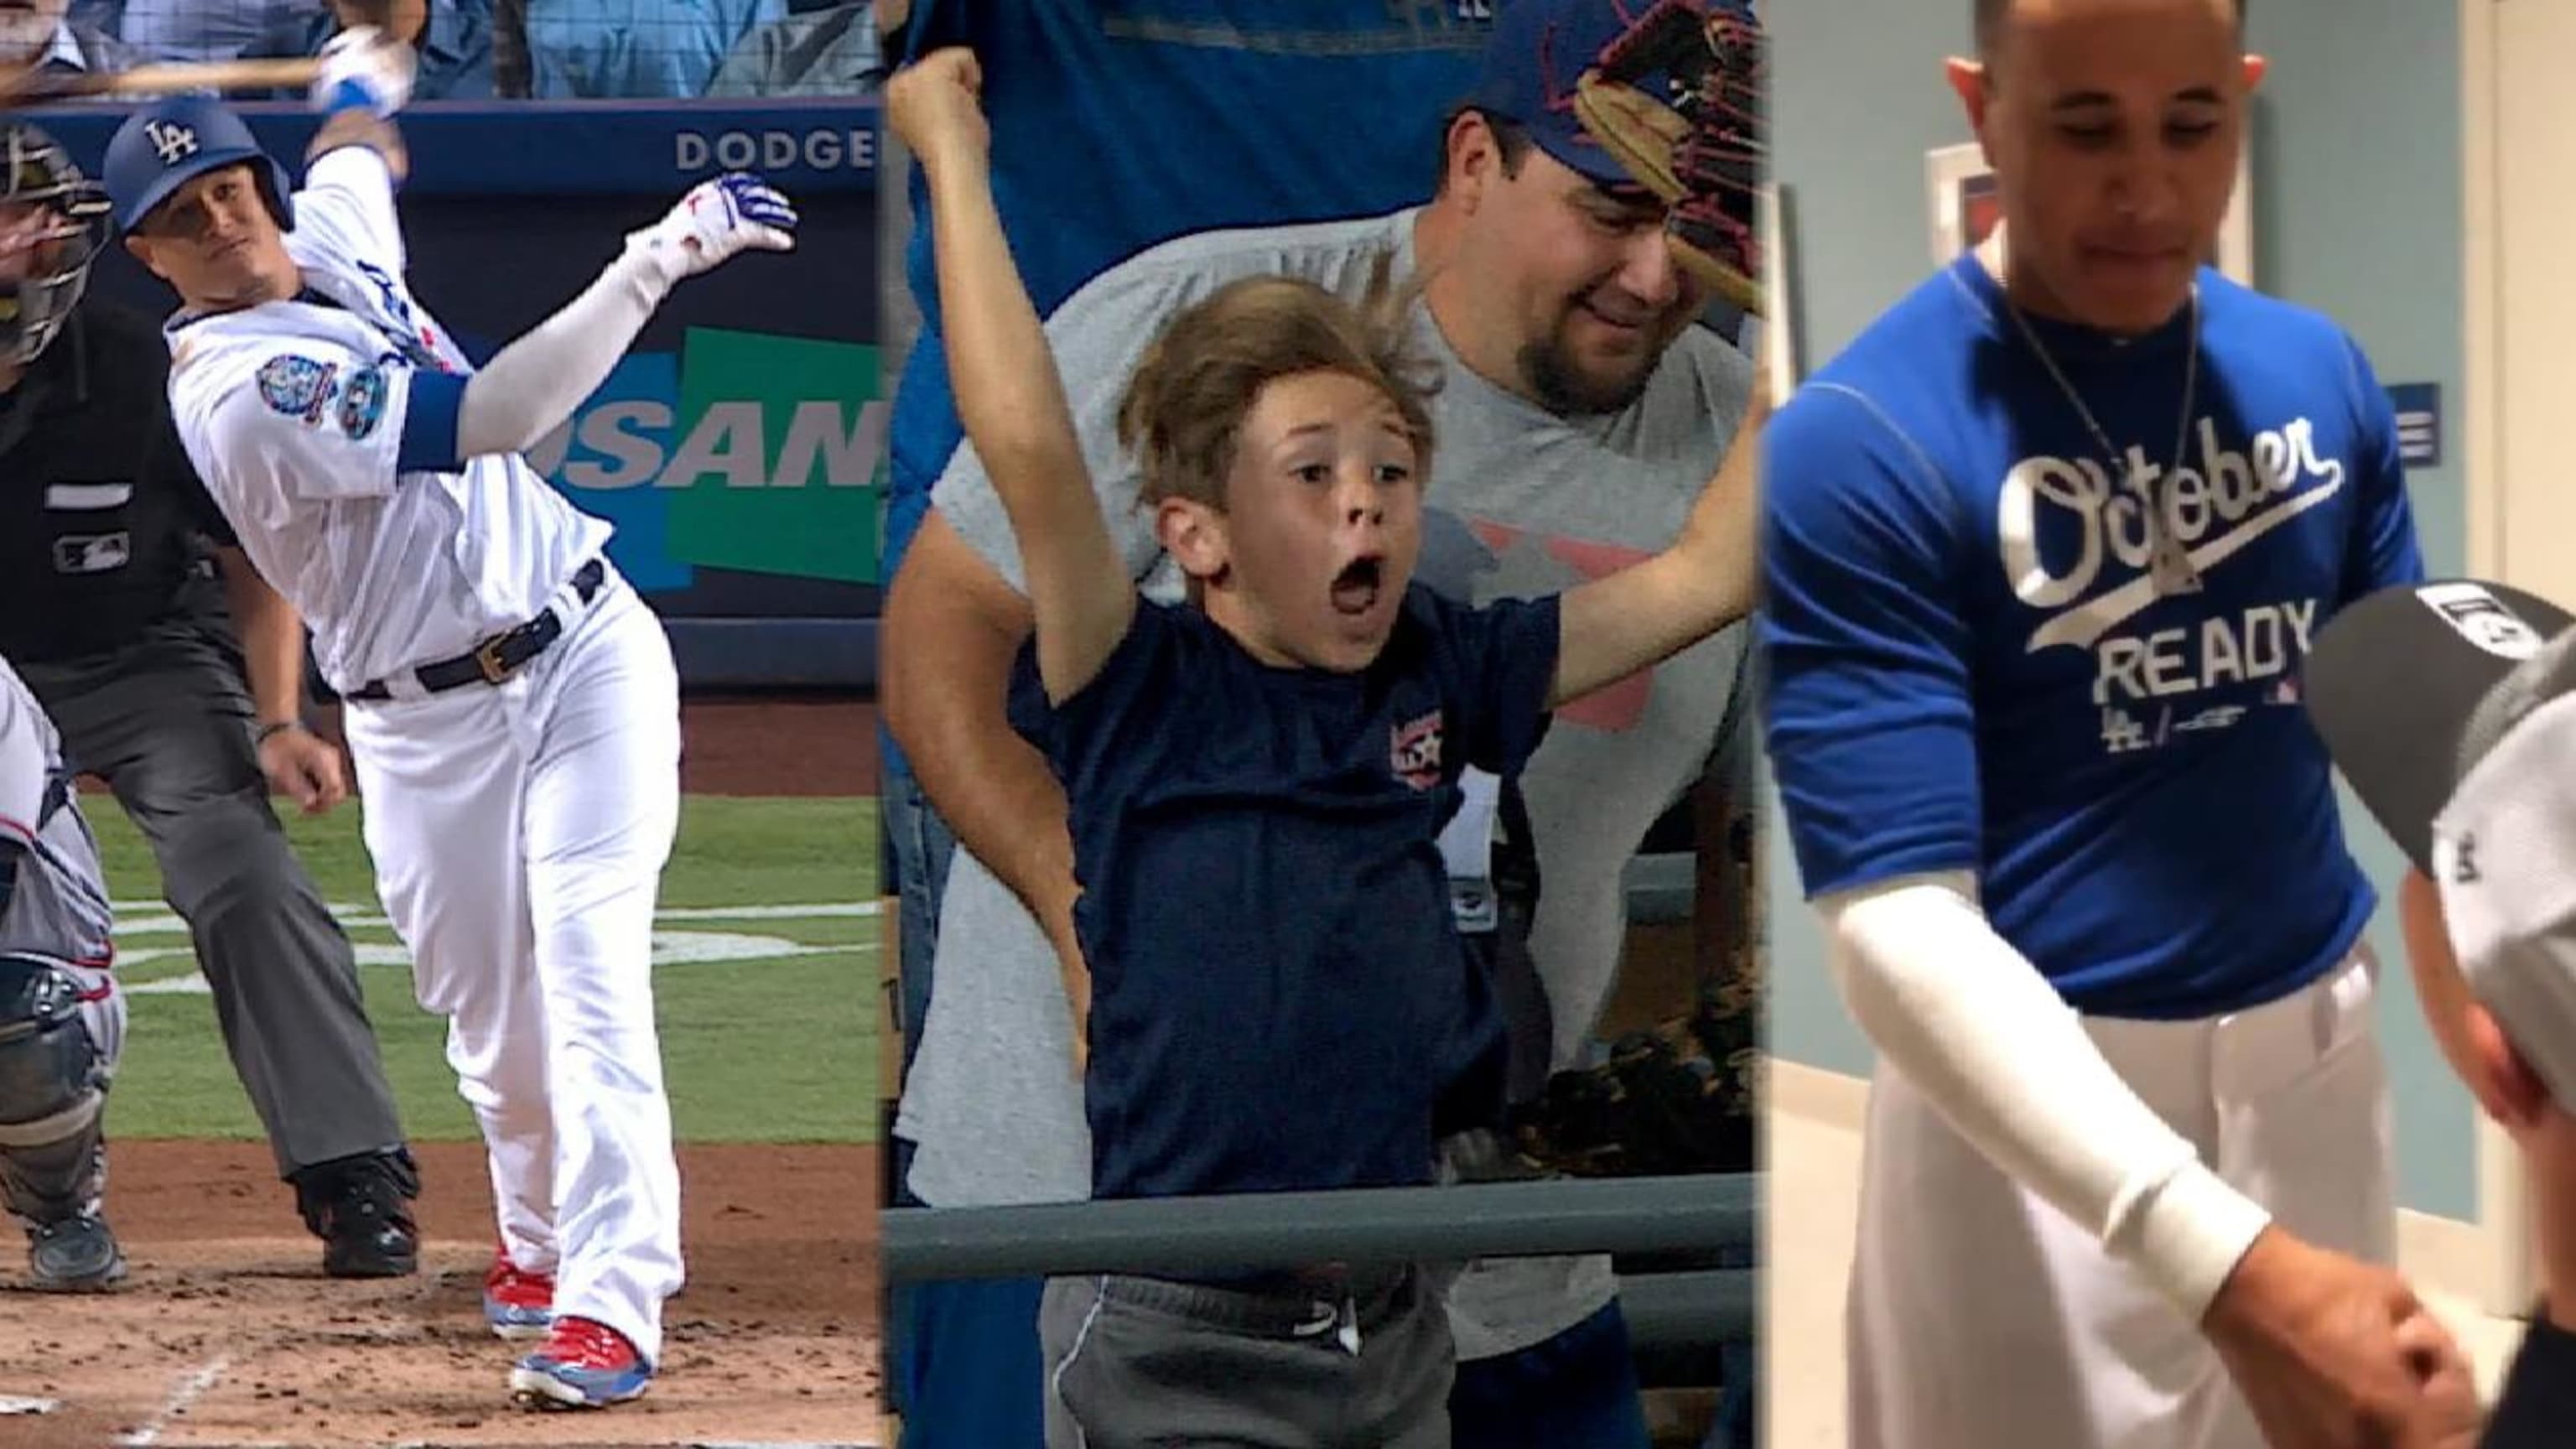 A young fan celebrated his birthday by catching Manny Machado's HR